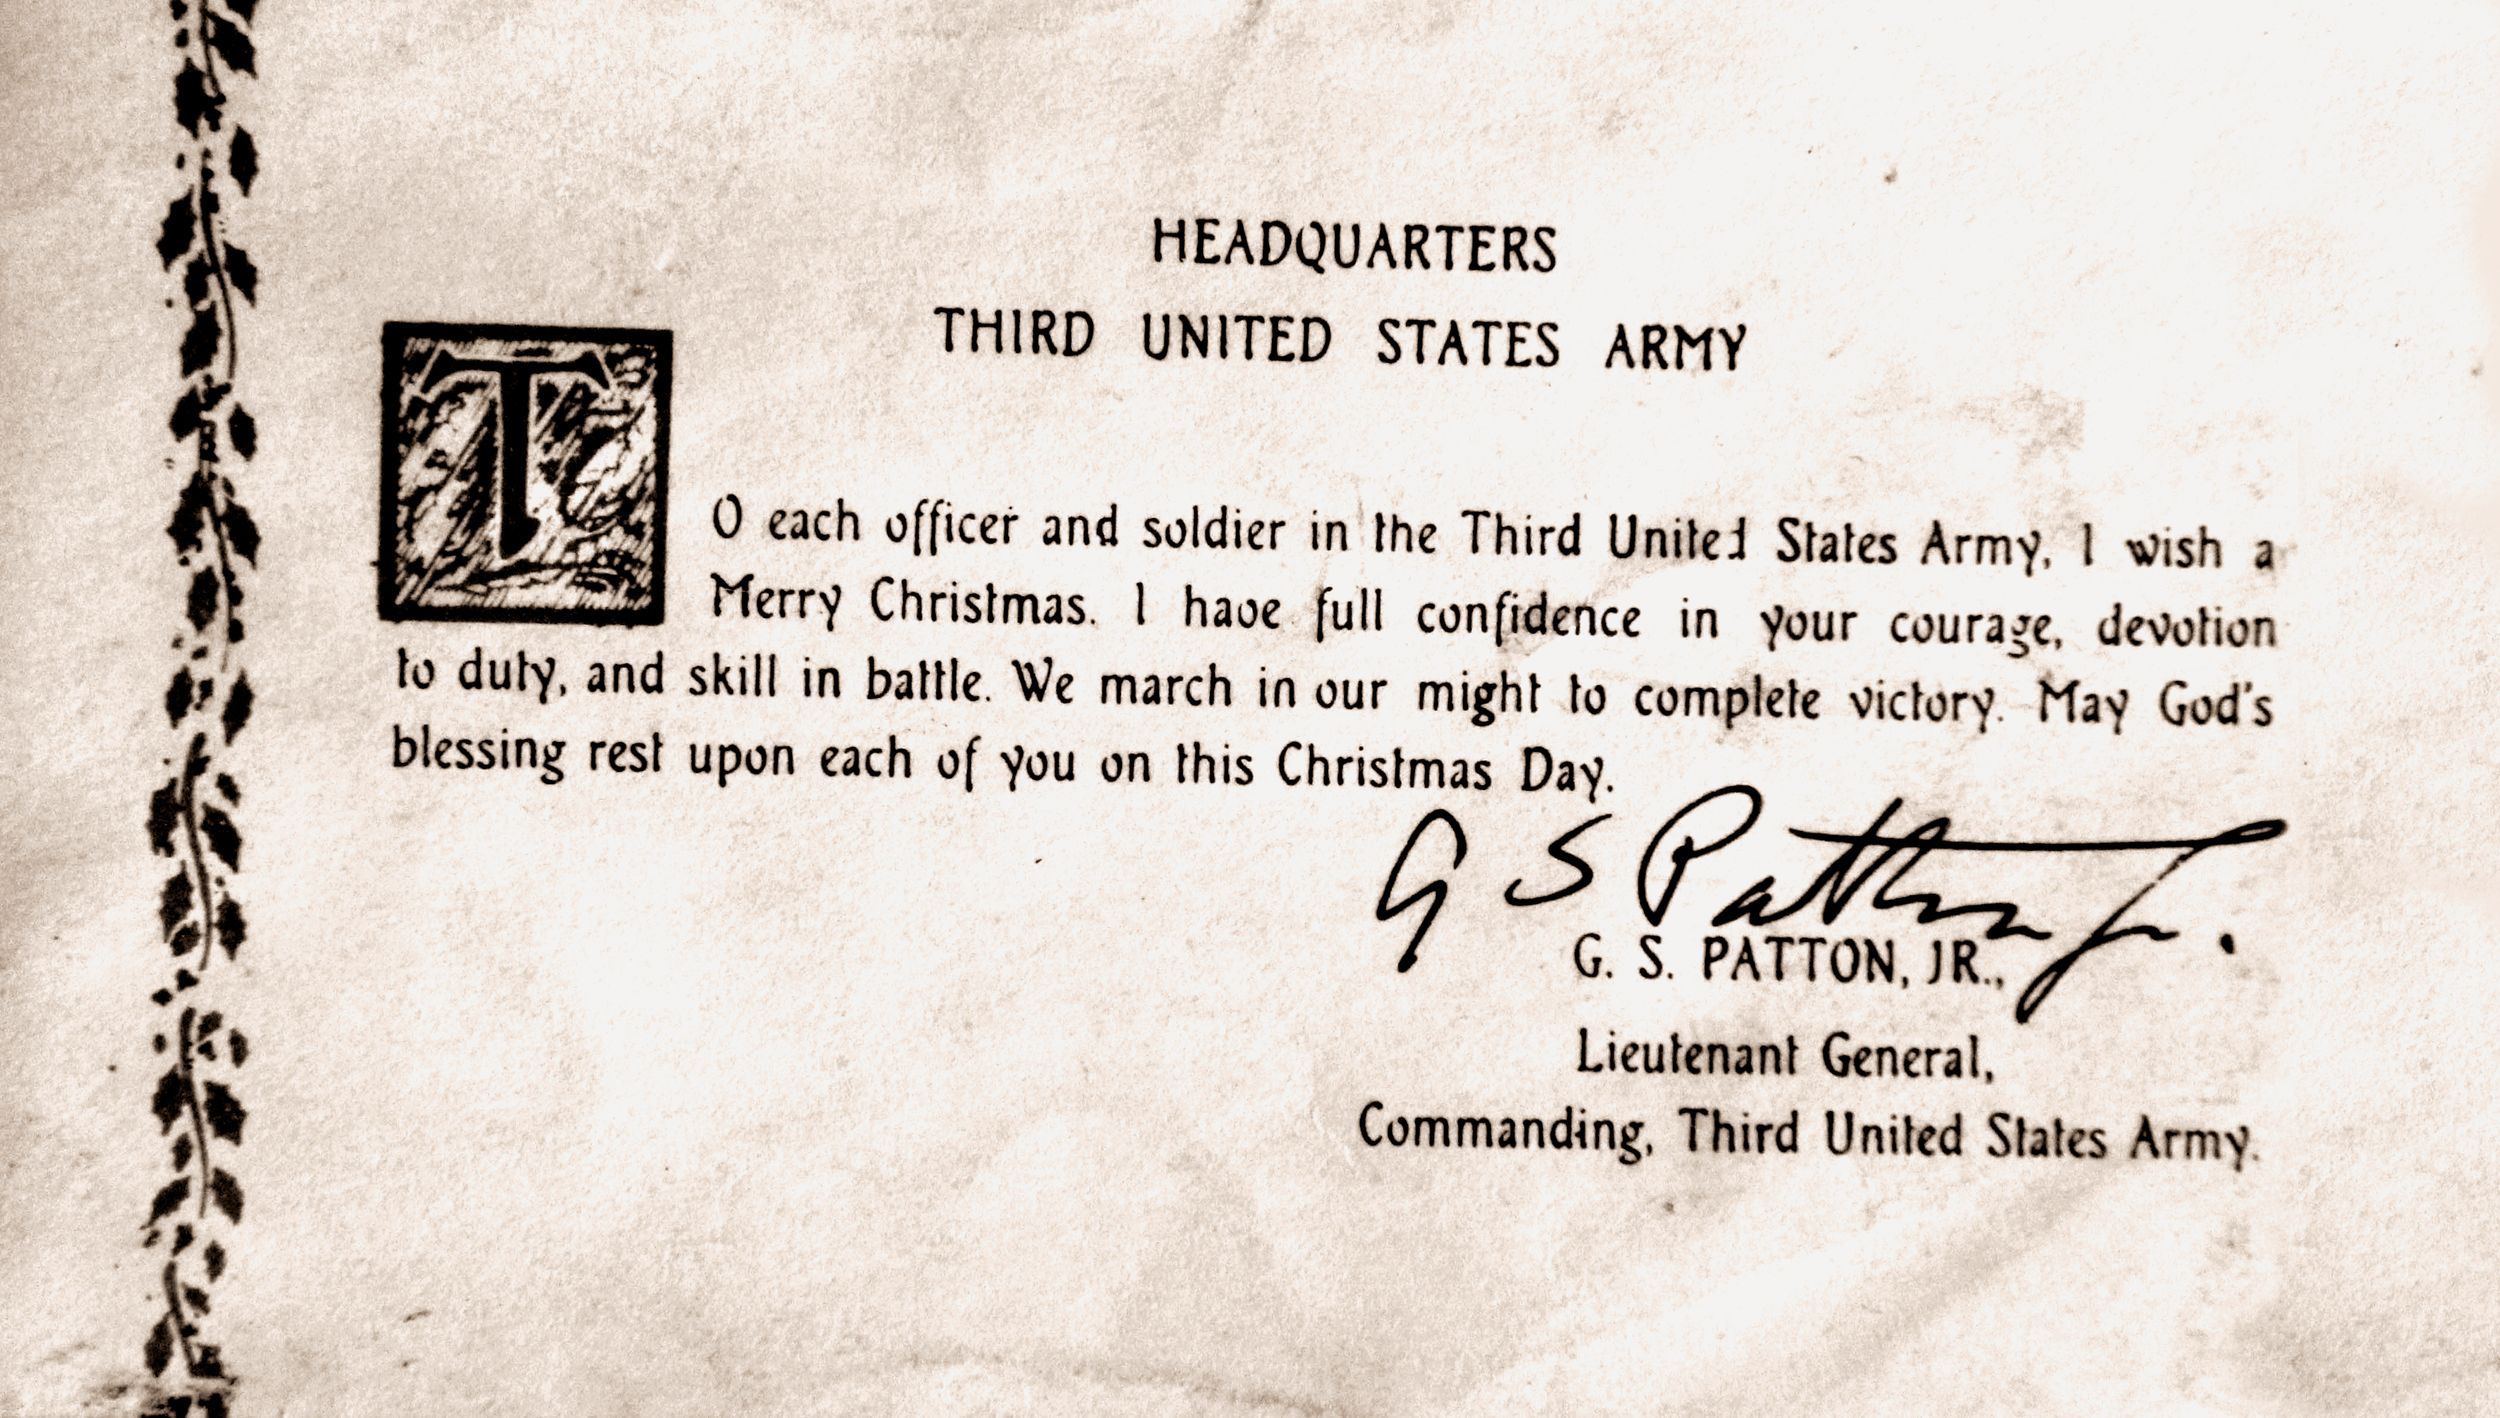 General George Patton, firebrand commander of the U.S. Third Army, issued this Christmas greeting to the troops under his command as they advanced to relieve the 101st Airborne Division and elements of Combat Command B, 10th Armored Division at Bastogne.